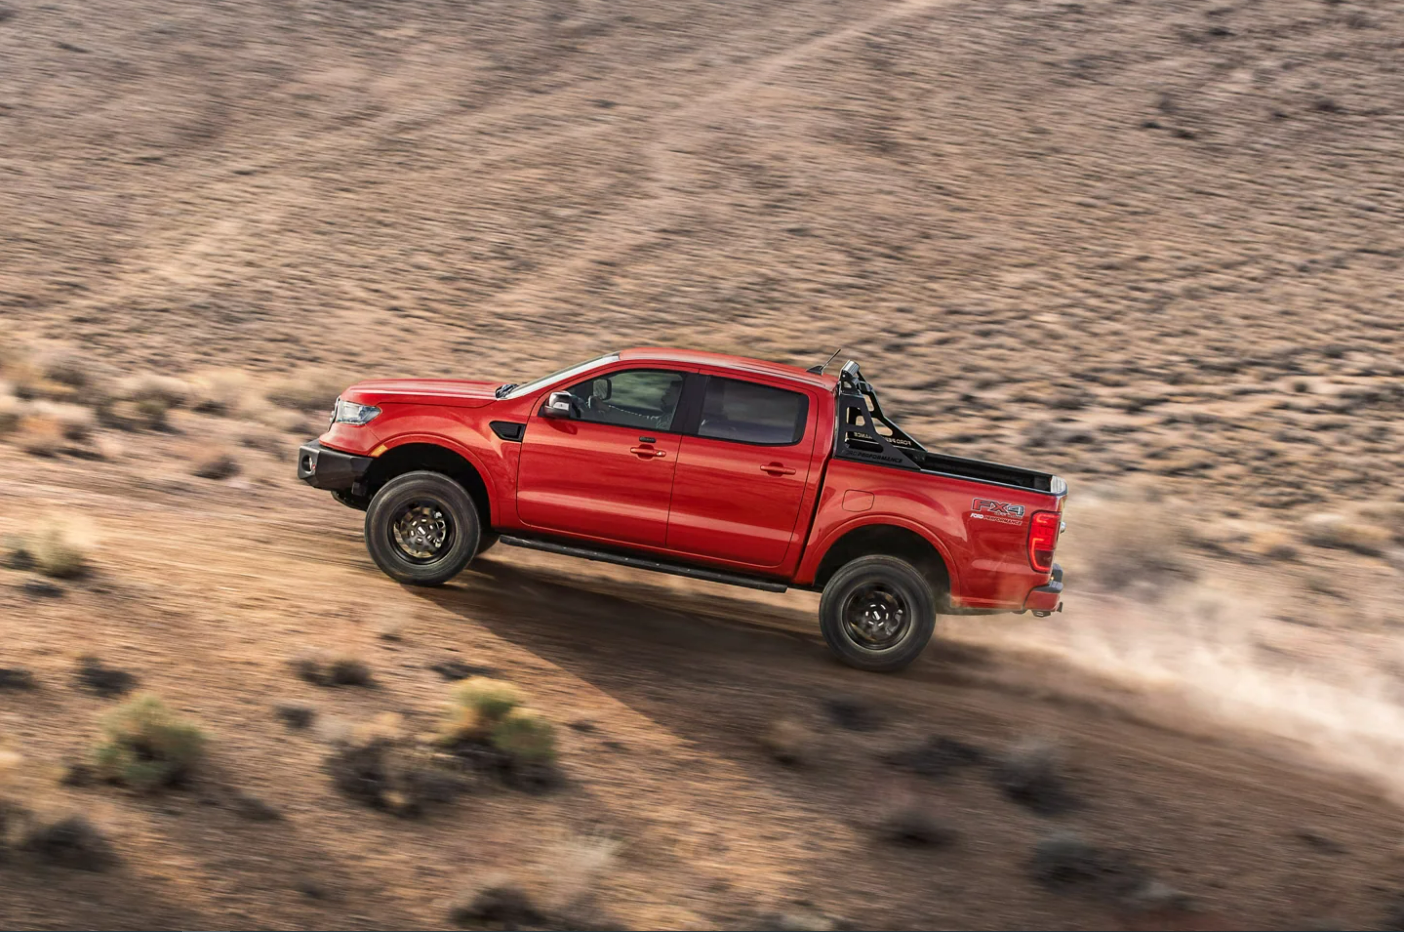 A profile view of a red 2023 Ford Ranger as it tackles a steep incline over rocky terrain